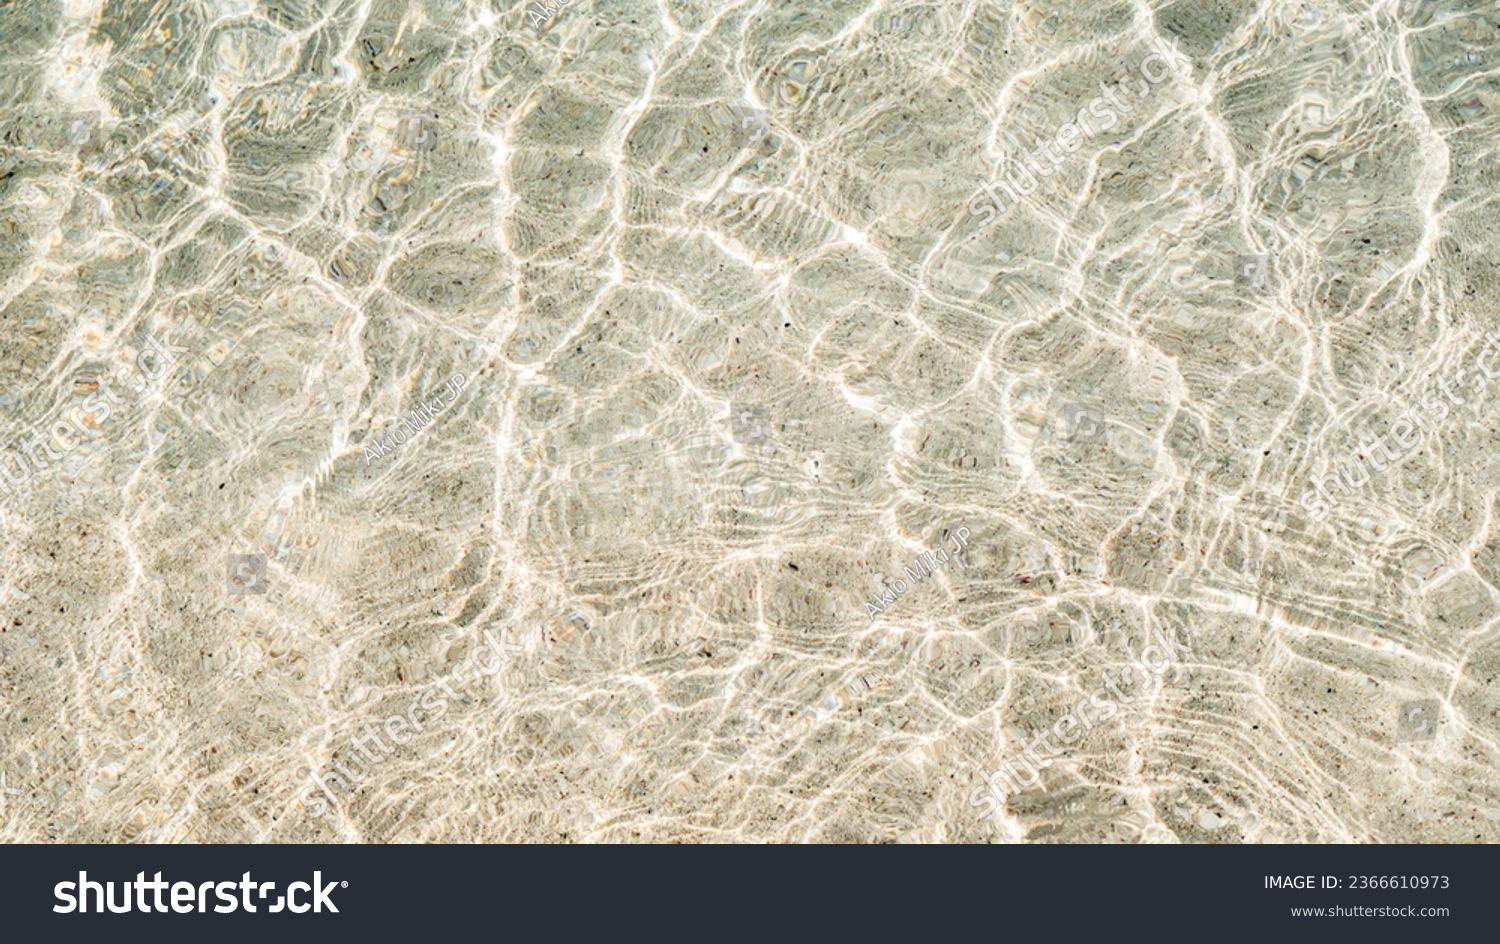 Clear waves of sea or ocean in the beach in summer, Background or wallpaper, High resolution over 50MP #2366610973